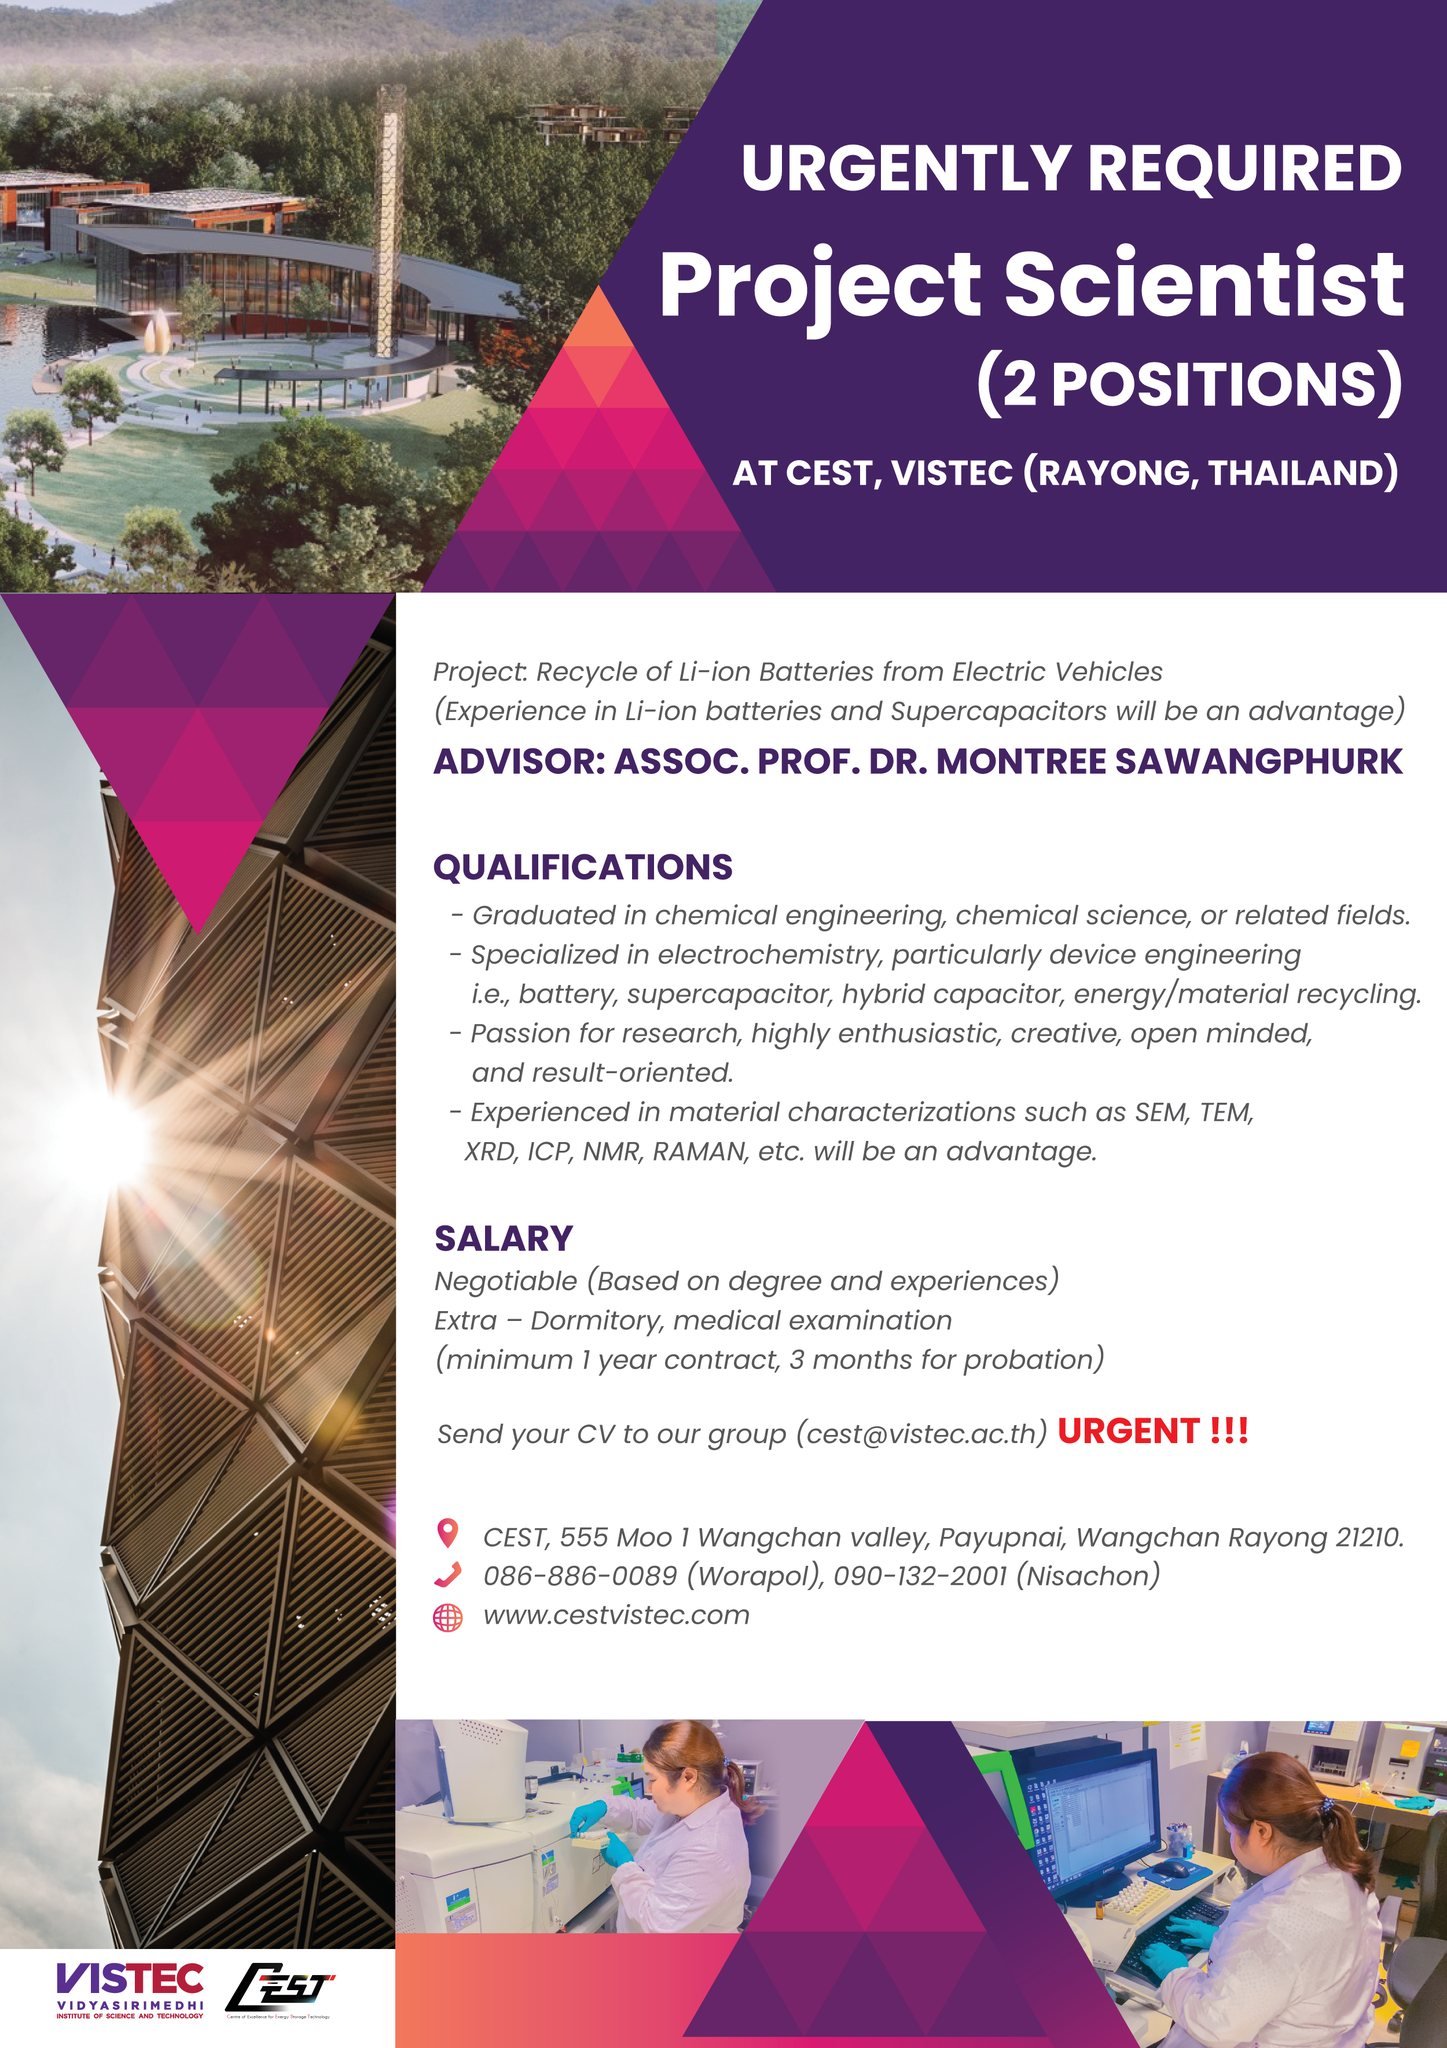 URGENTLY REQUIRED  PROJECT SCIENTIST (2 POSITIONS) AT CEST, VISTEC (RAYONG, THAILAND)